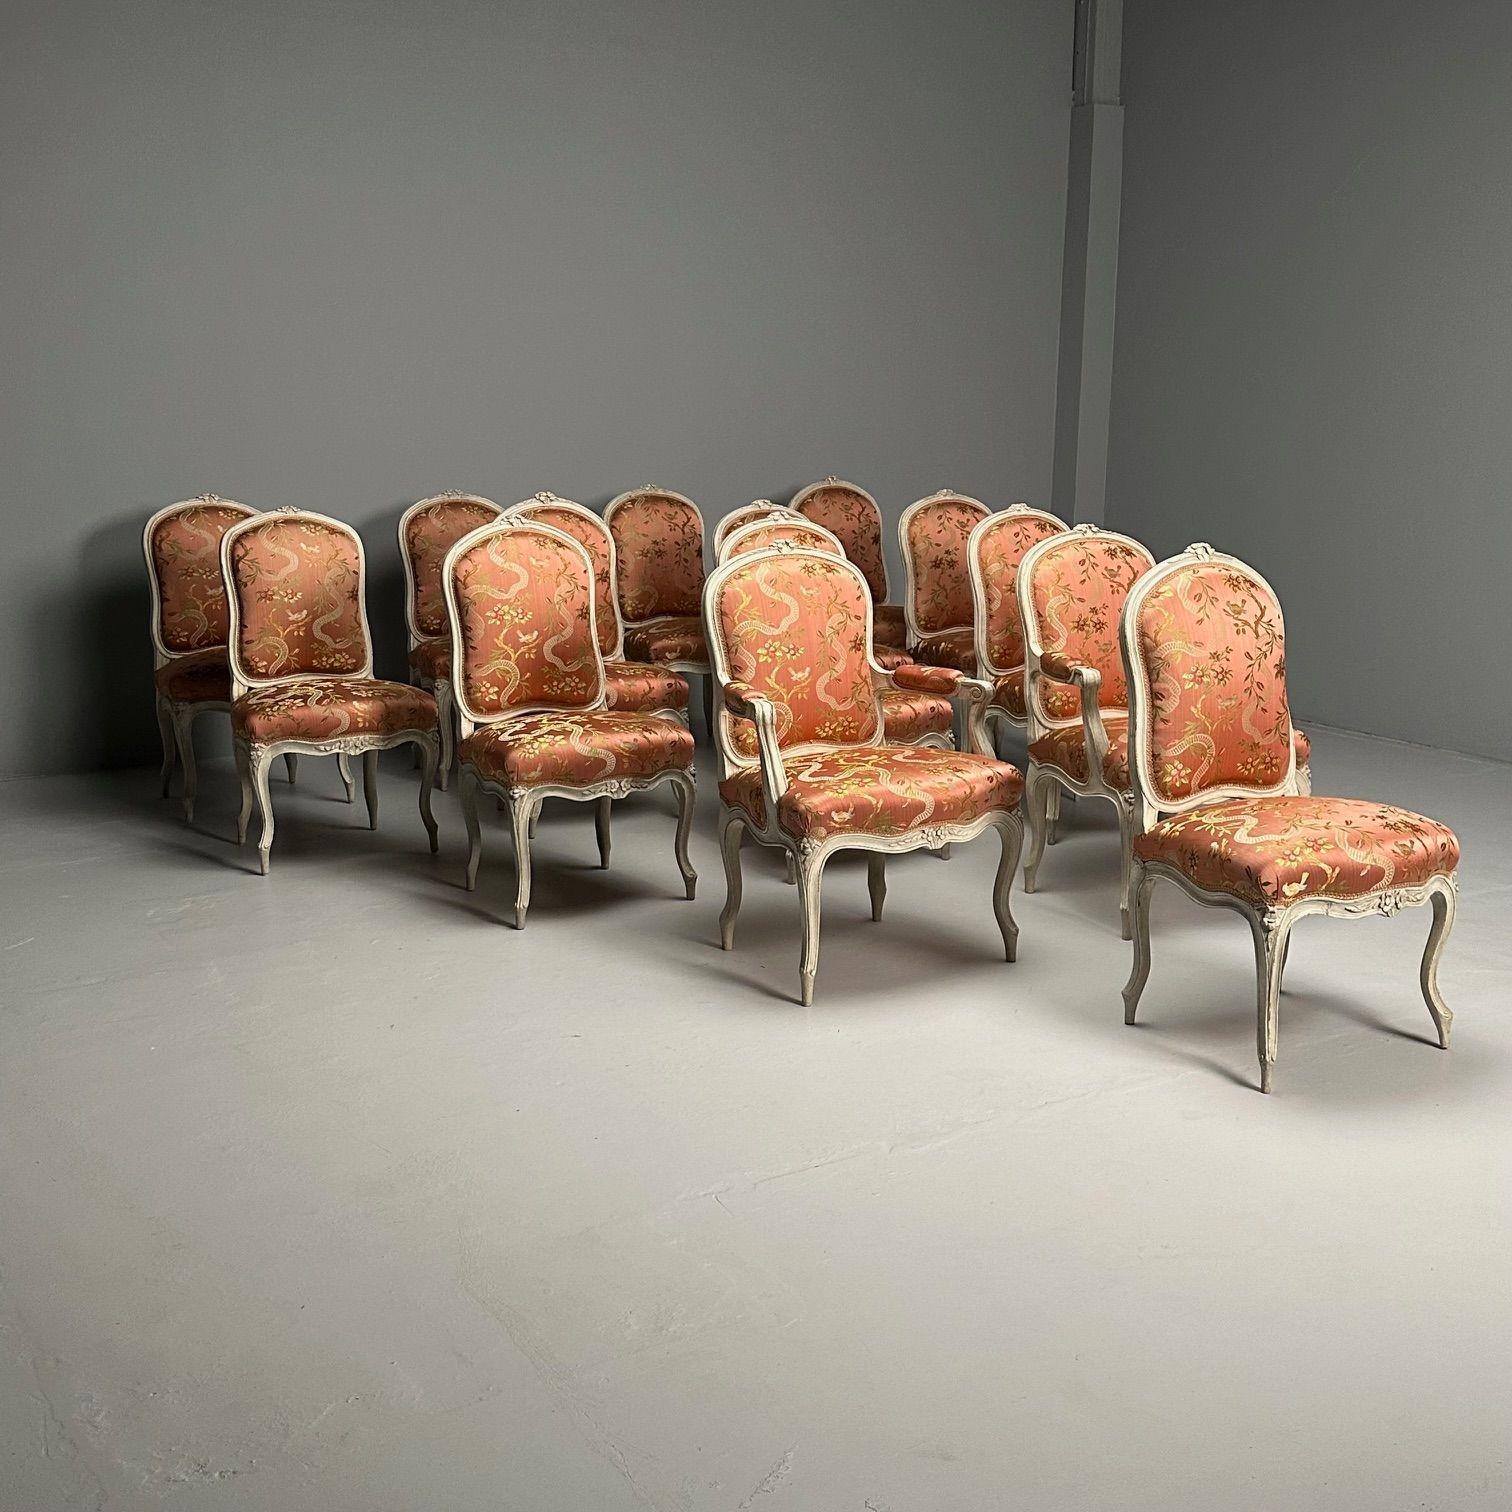 Upholstery Jean Baptist Cresson, Louis XV, 14 Dining Chairs, France, 18th C., Christies